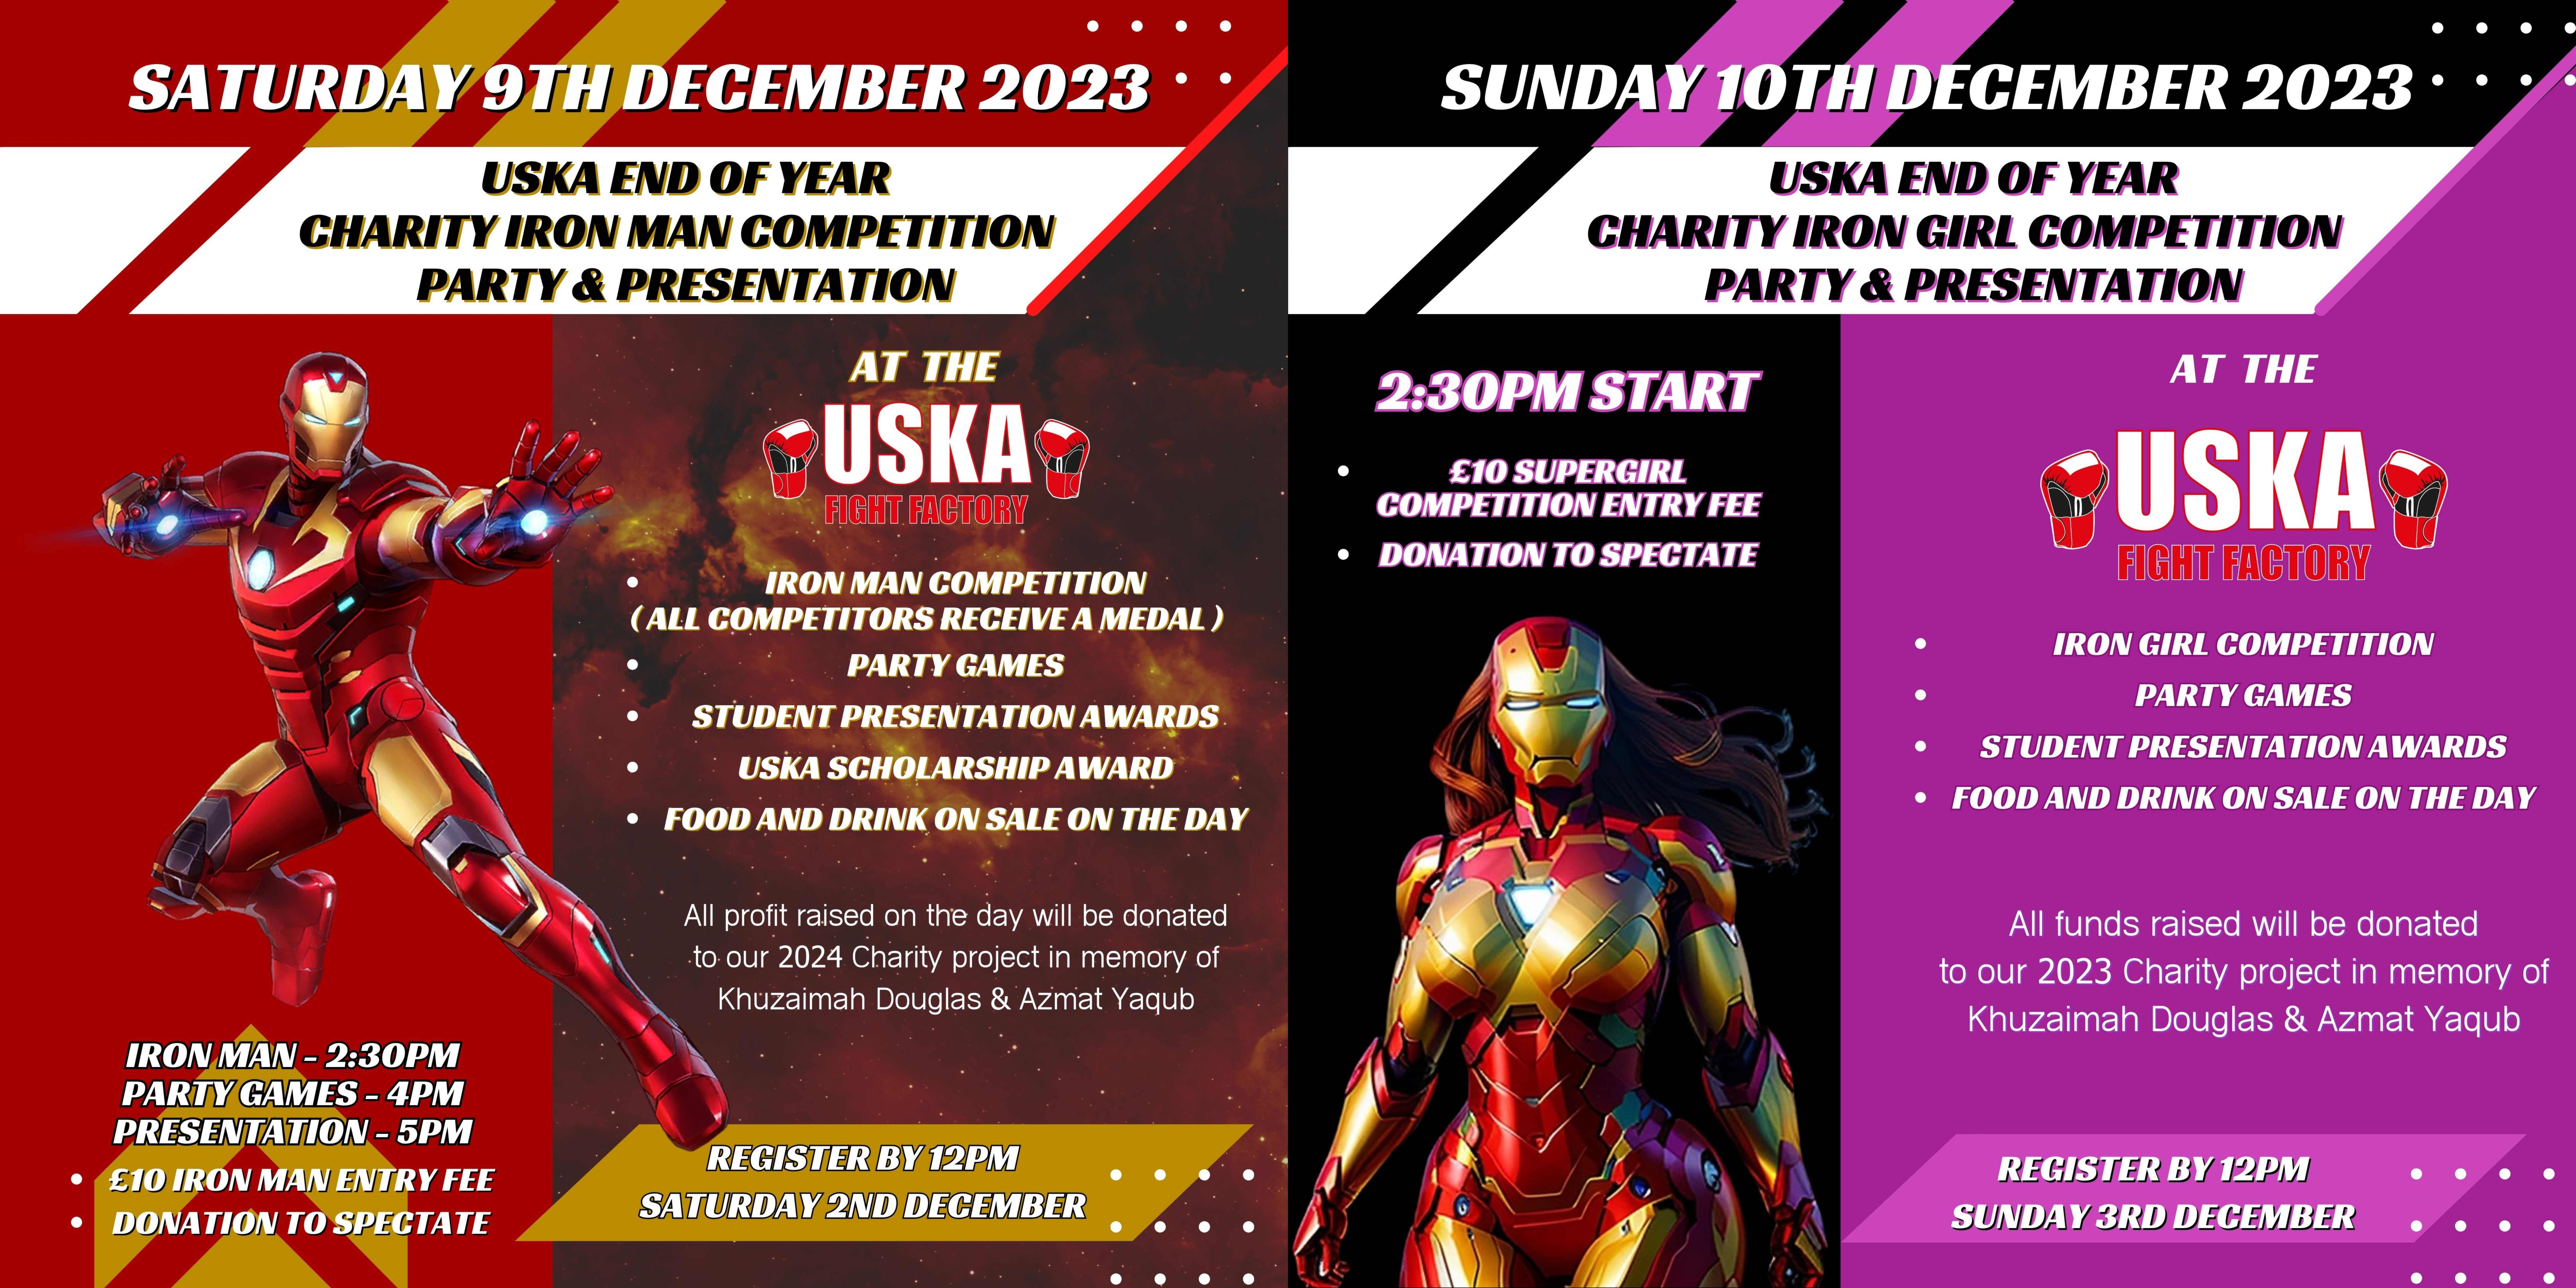 21-11-23 - USKA End Of Year Events Approaching - Don't Miss Out!